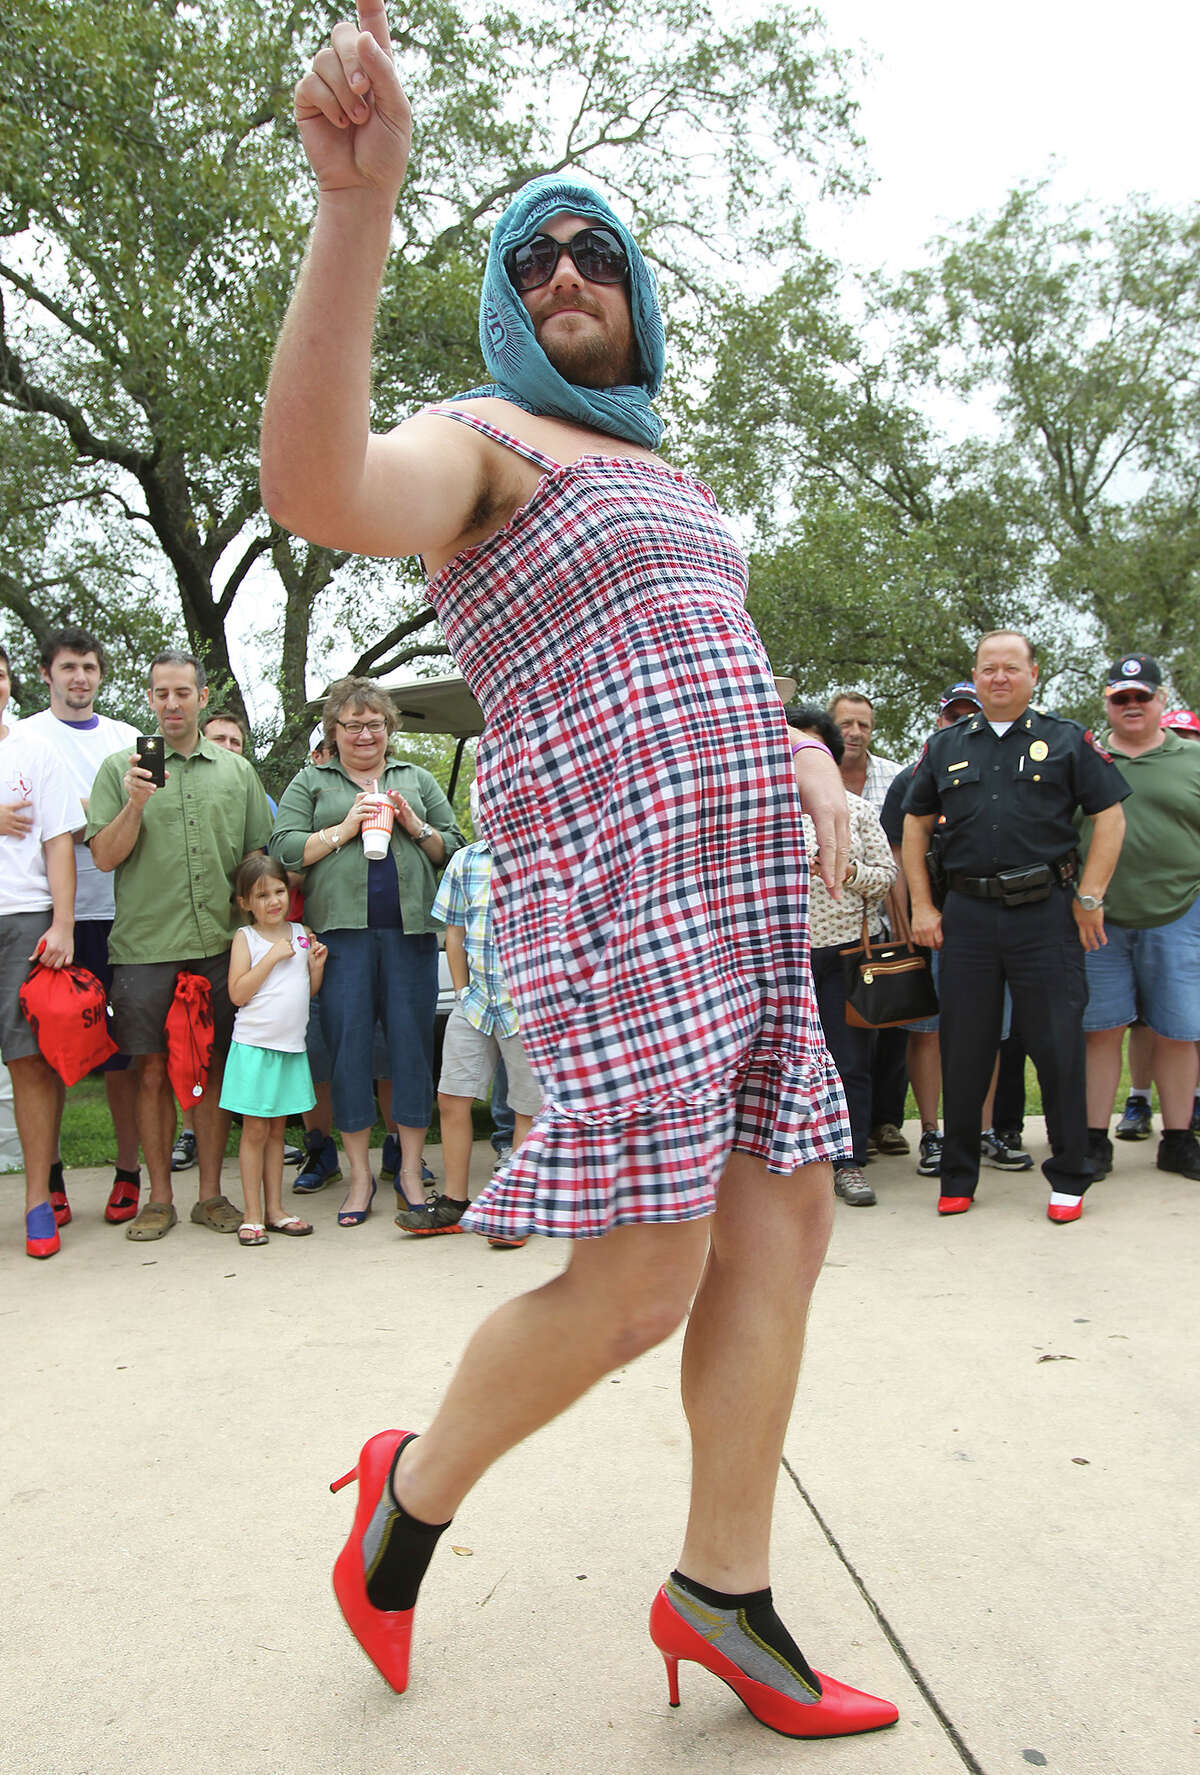 Men of Kendall County participate in "Walk a Mile in Her Shoes" to benefit the Kendall County Women's Shelter in downtown Boerne on October 3, 2012.